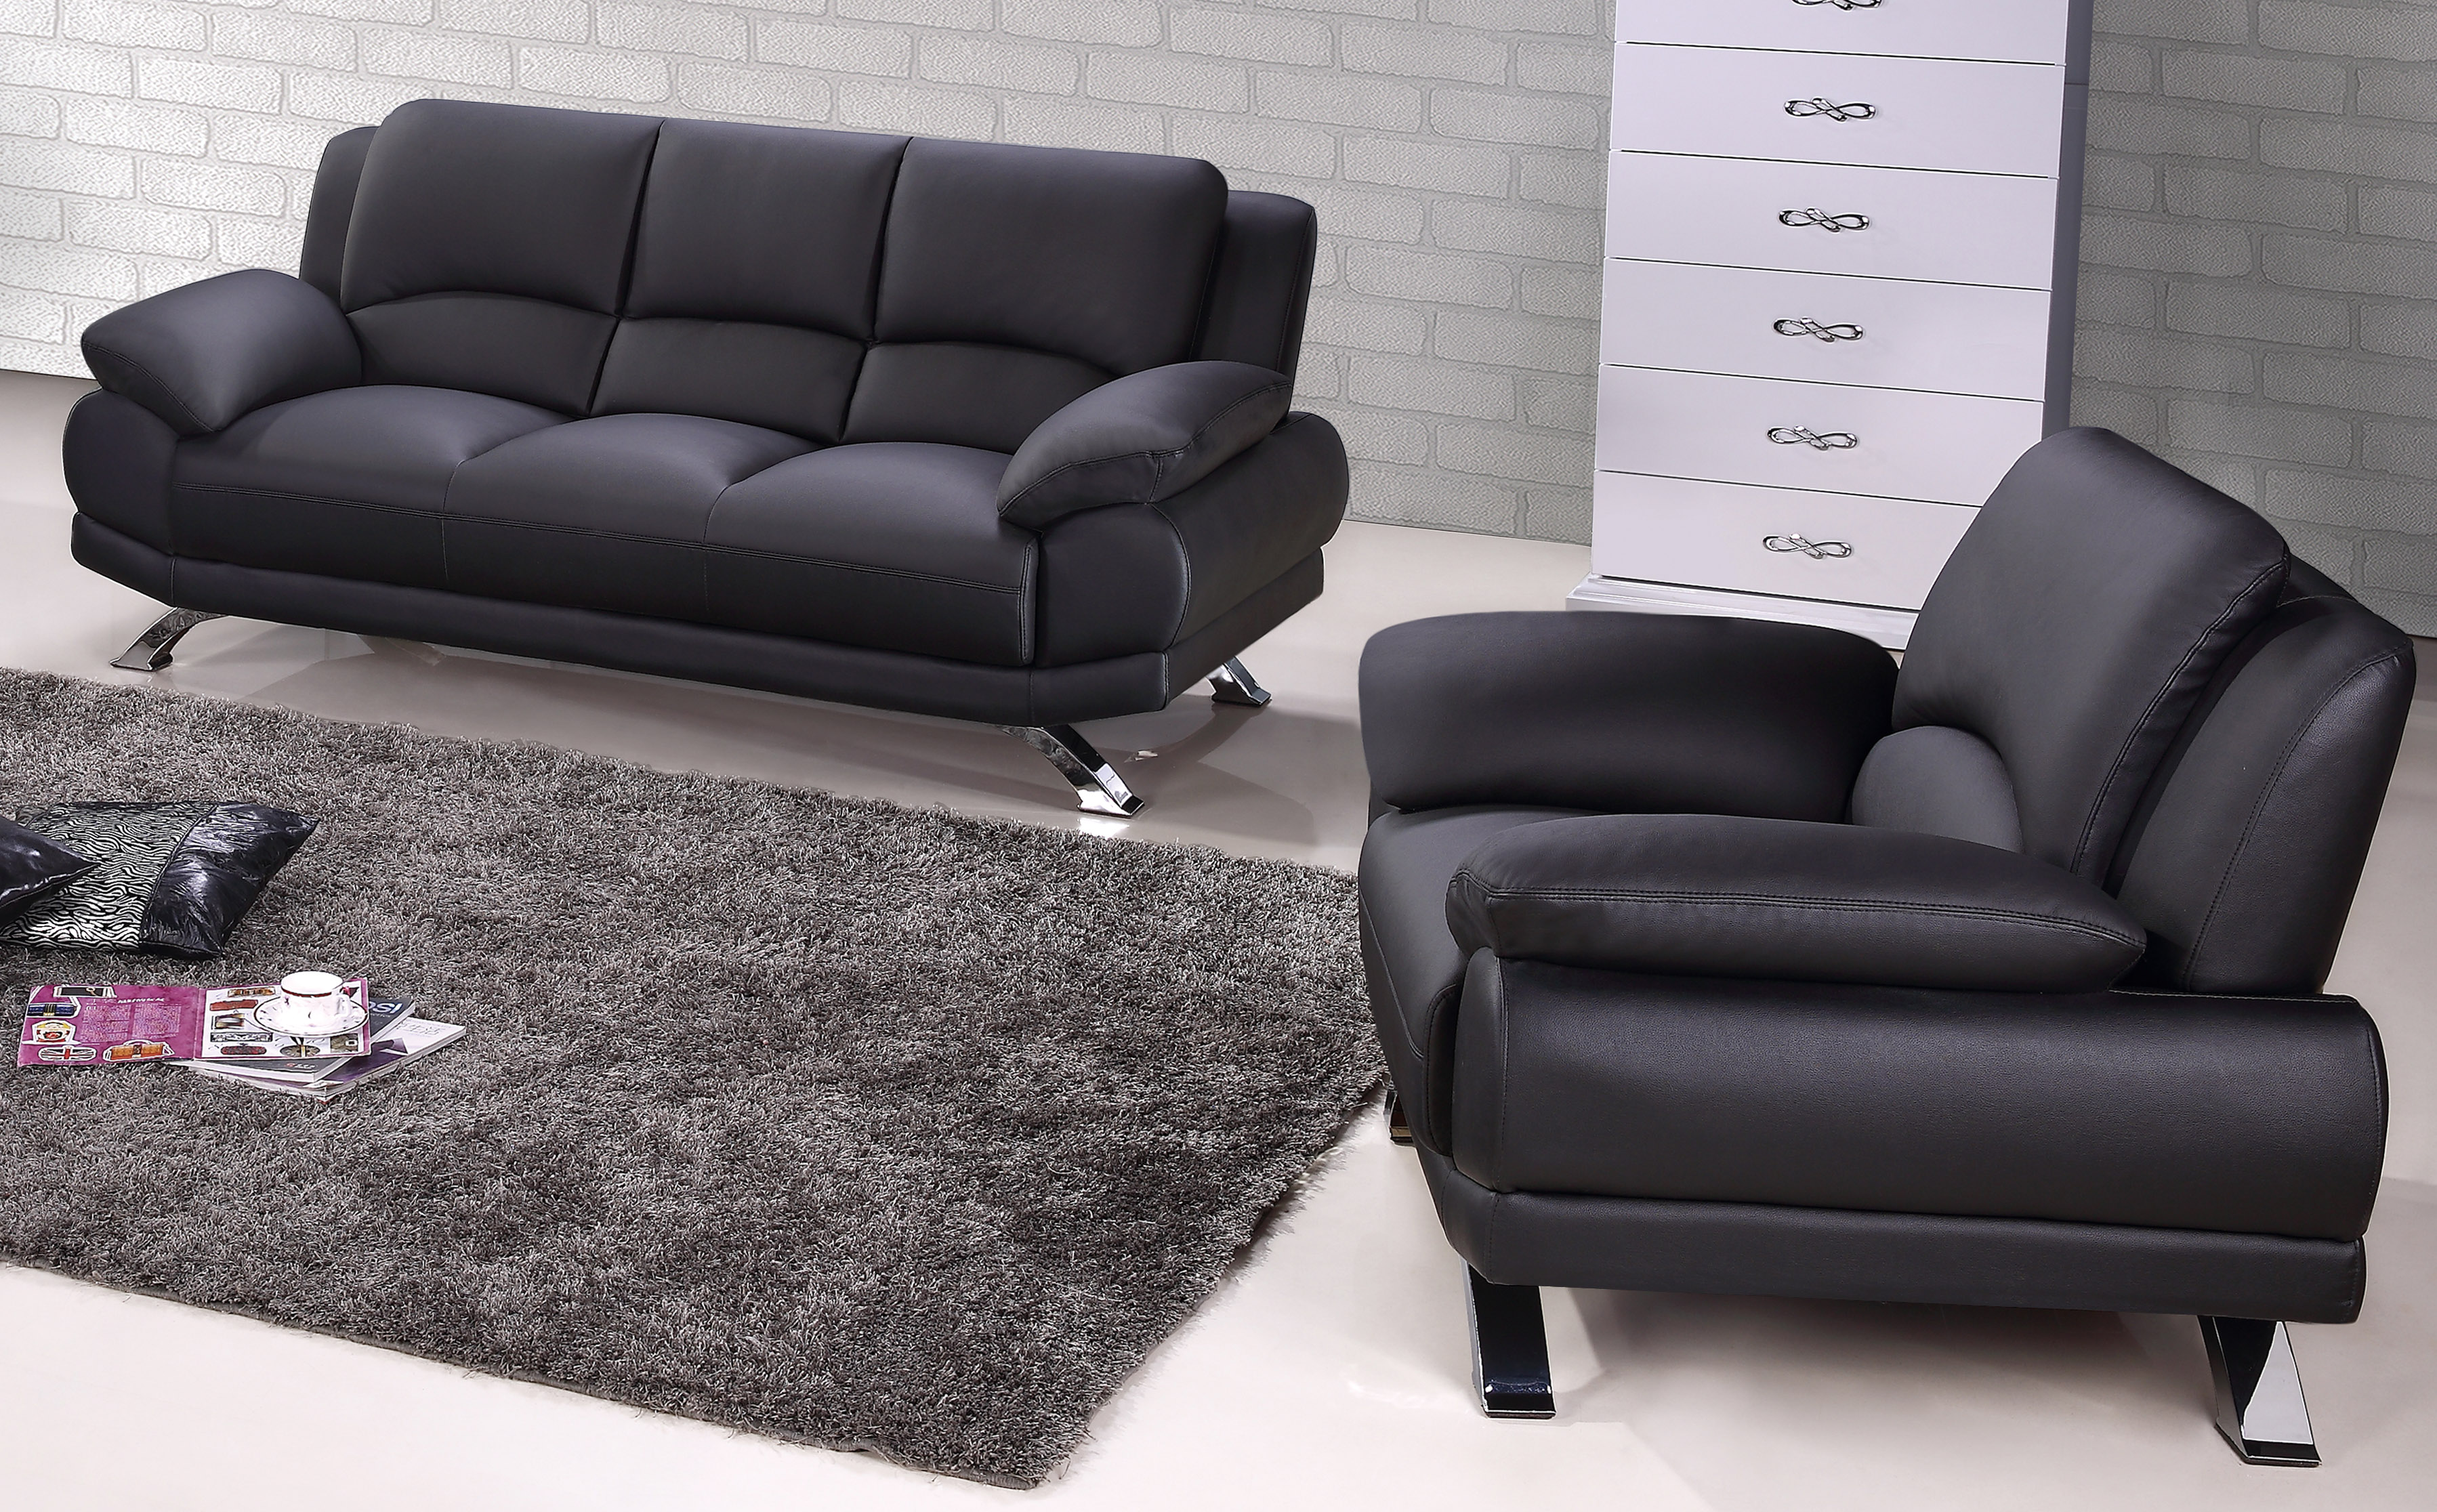 Black Top-Grain Leather Sofa Set with Tufted Pillows - Click Image to Close